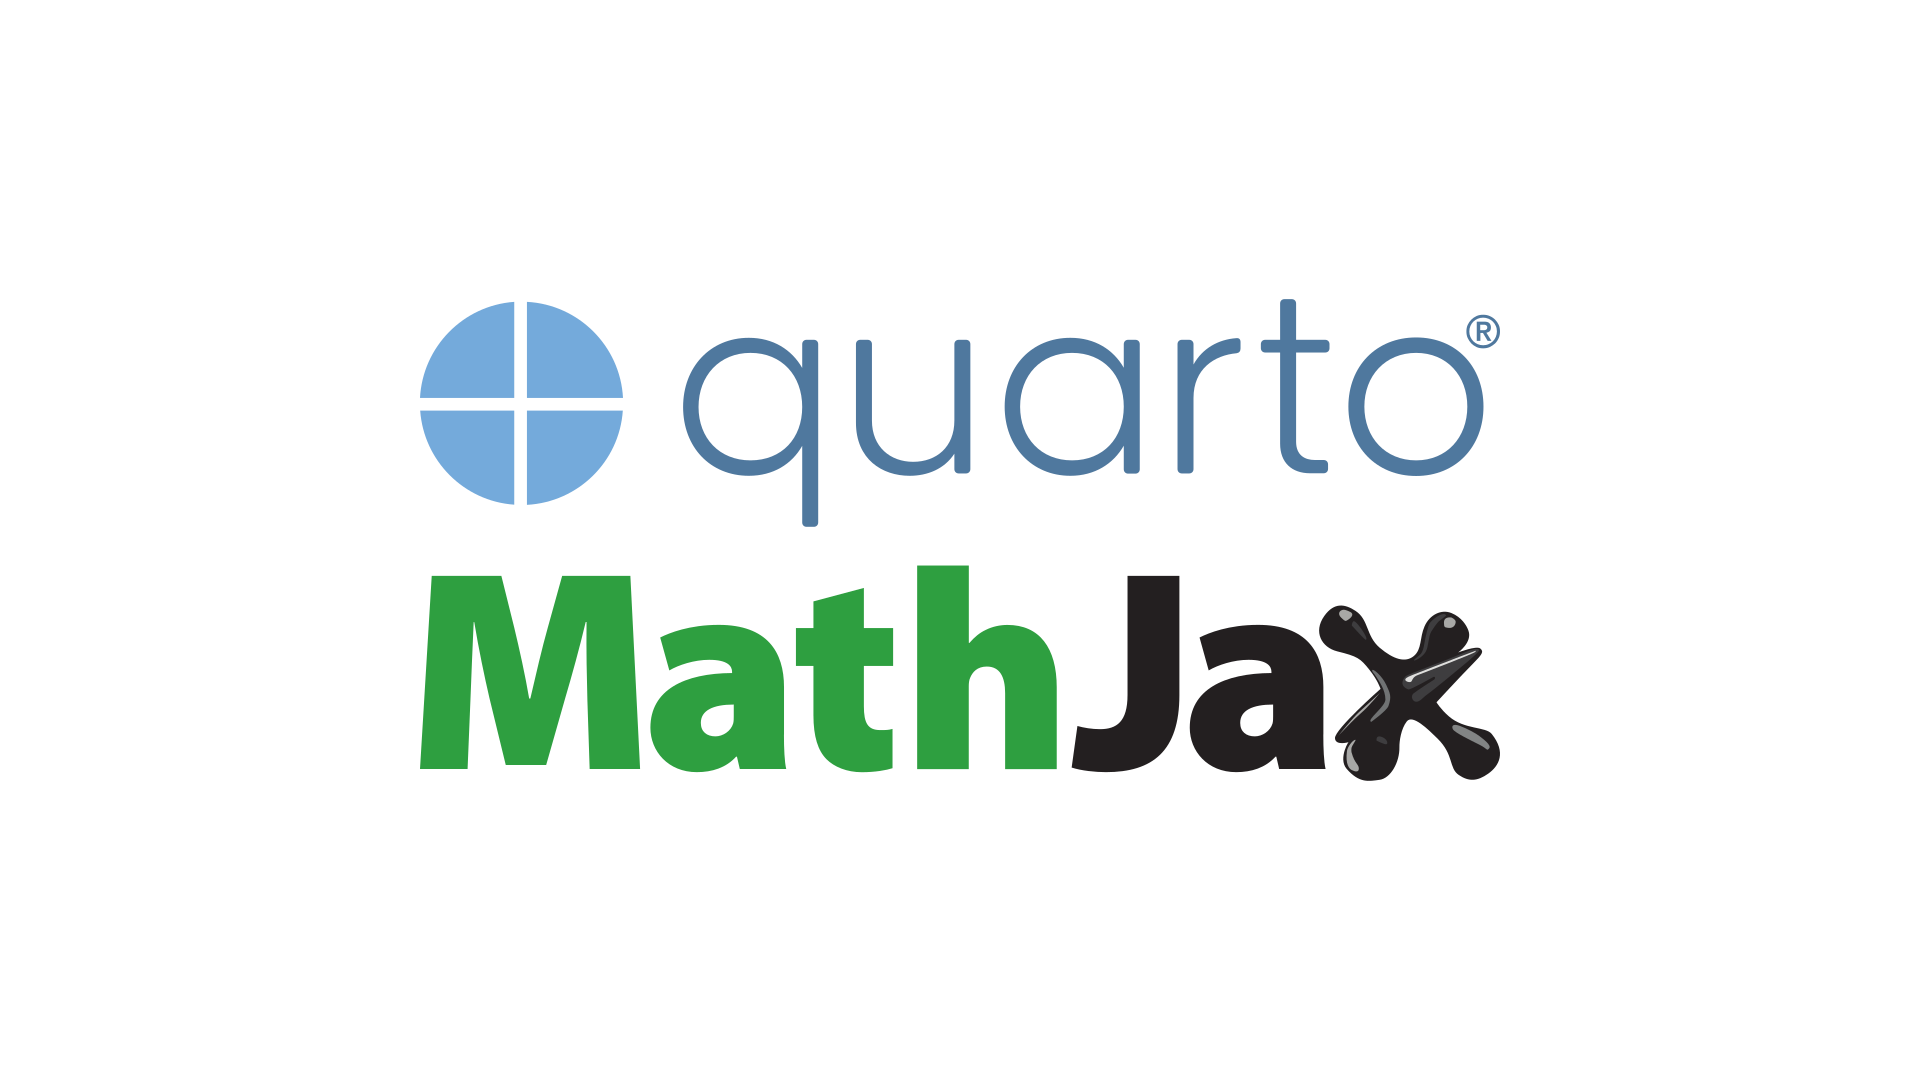 Quarto logo and text in the center of the image. Below, MathJax logo and text.
